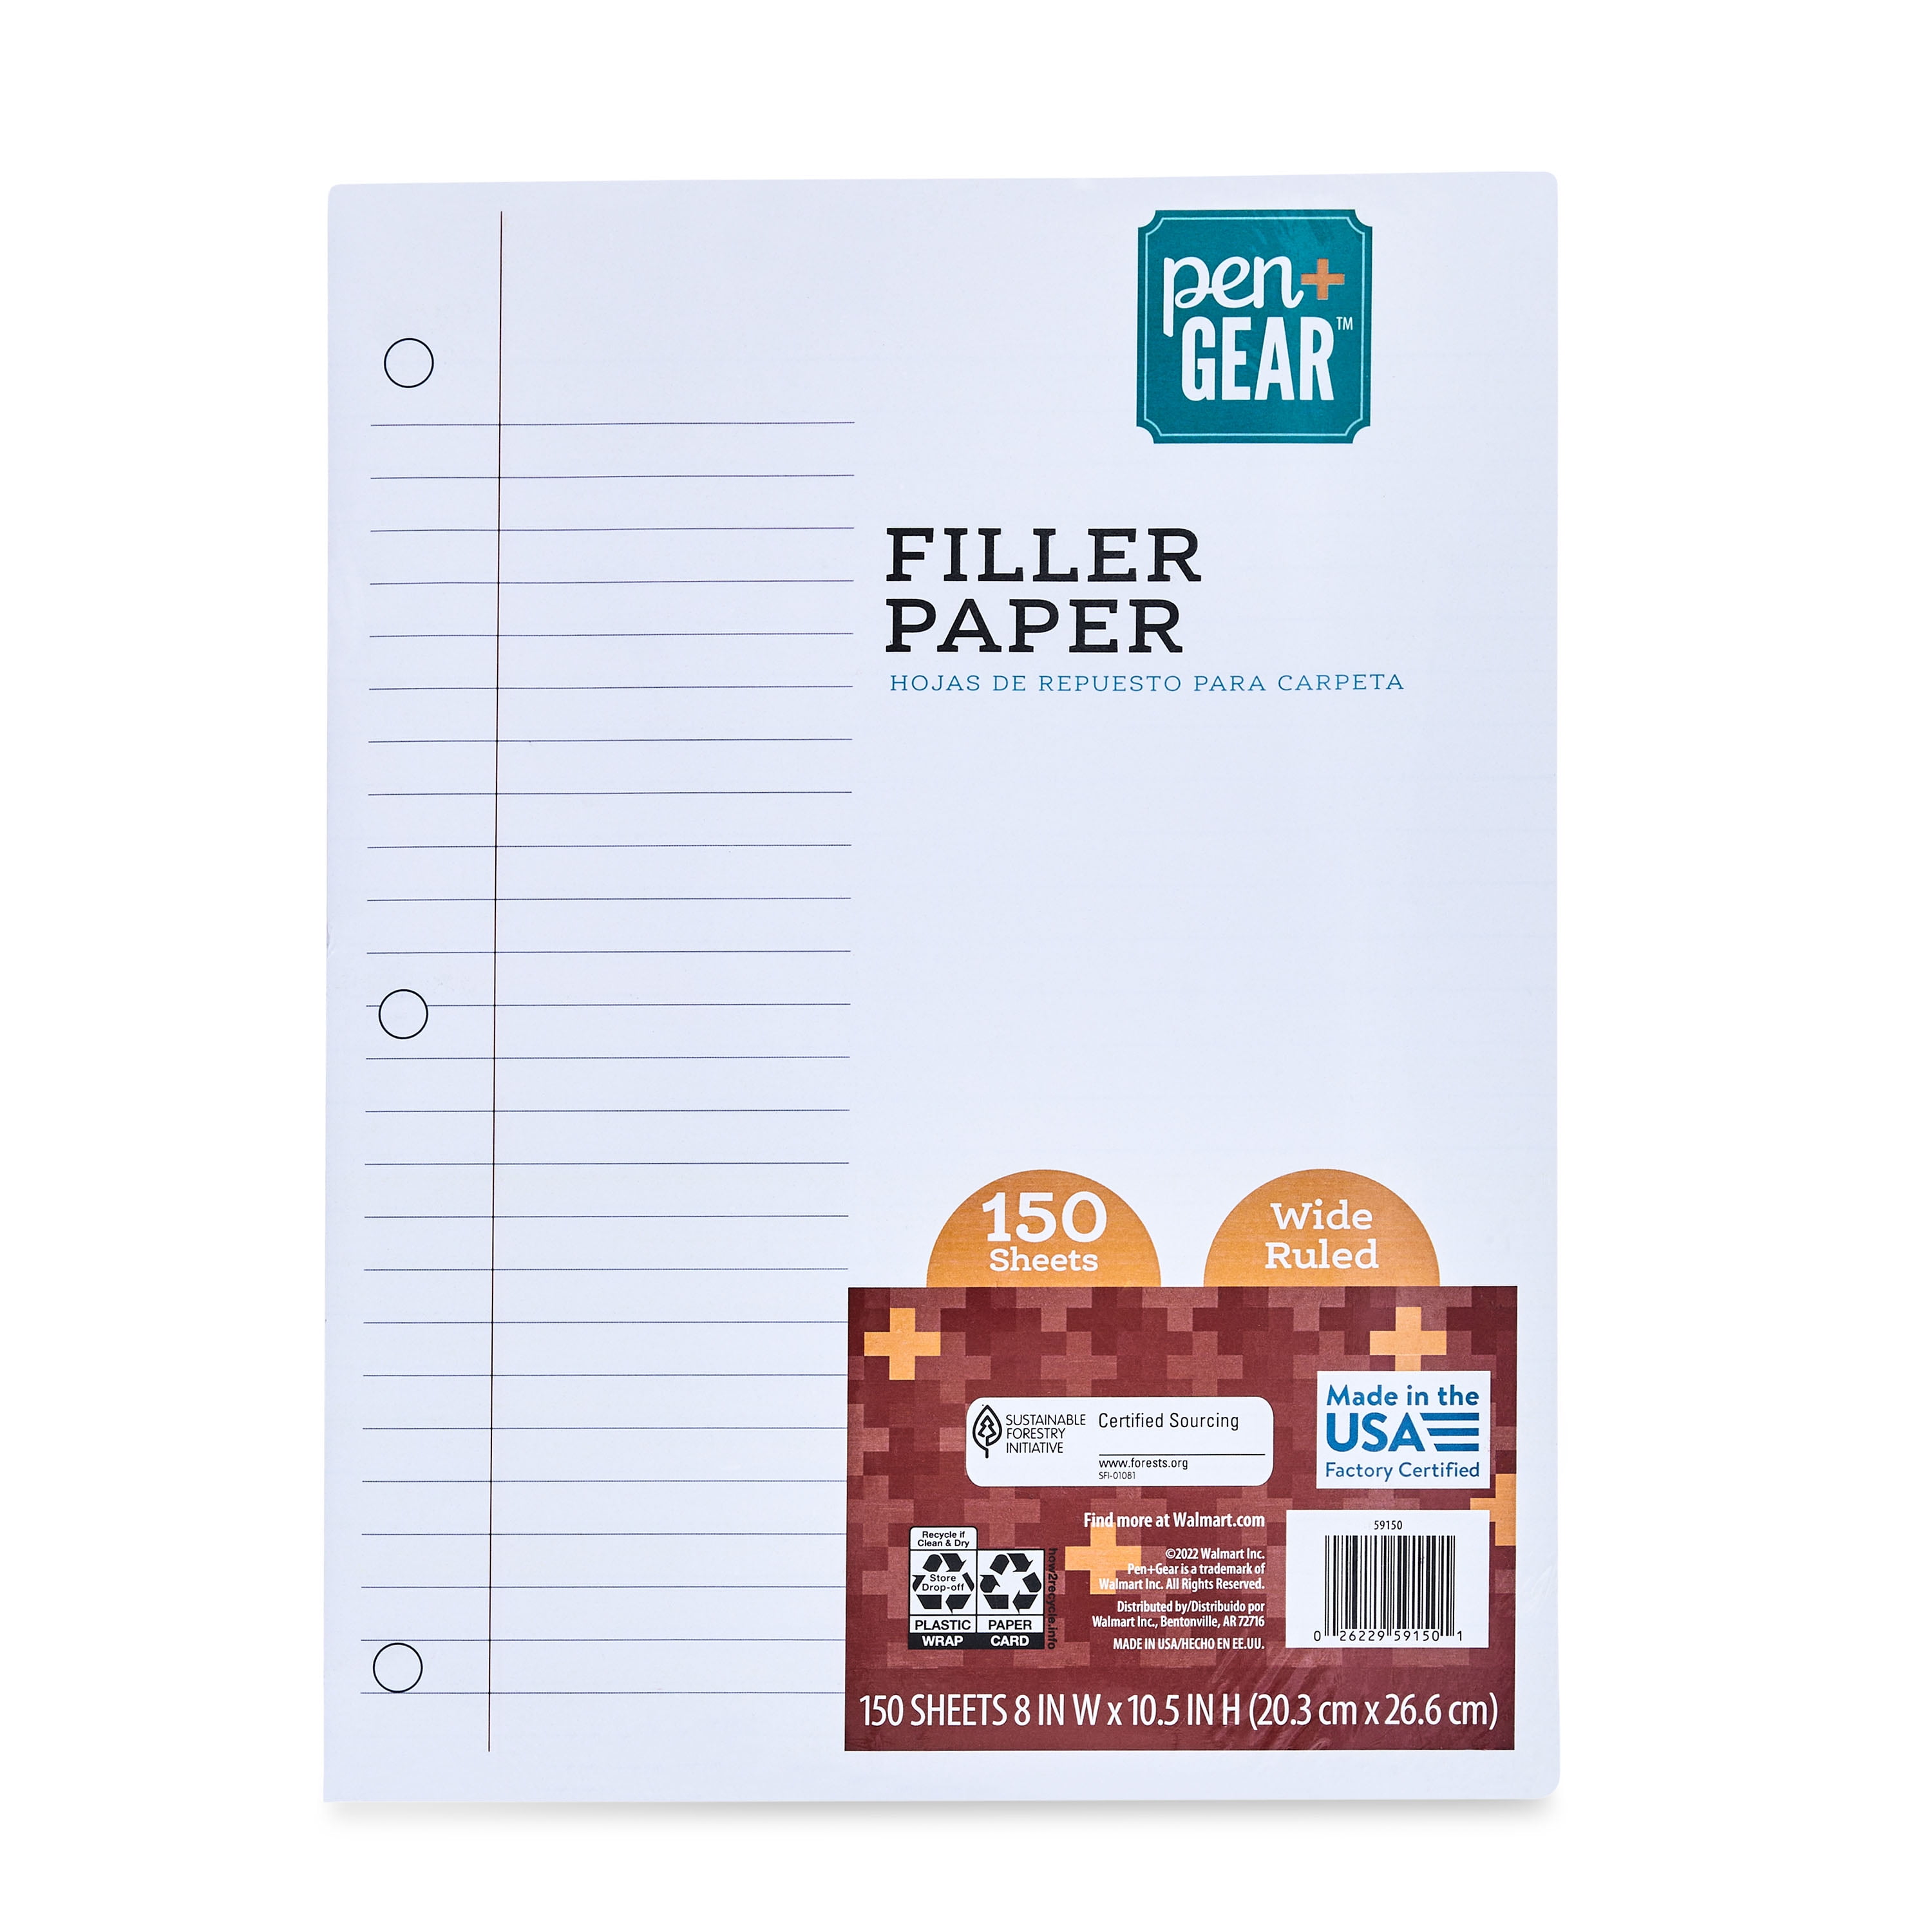 Pen+Gear 150ct Filler Paper Wide Ruled  10.5 x 8  @ $0.84 with free store pickup